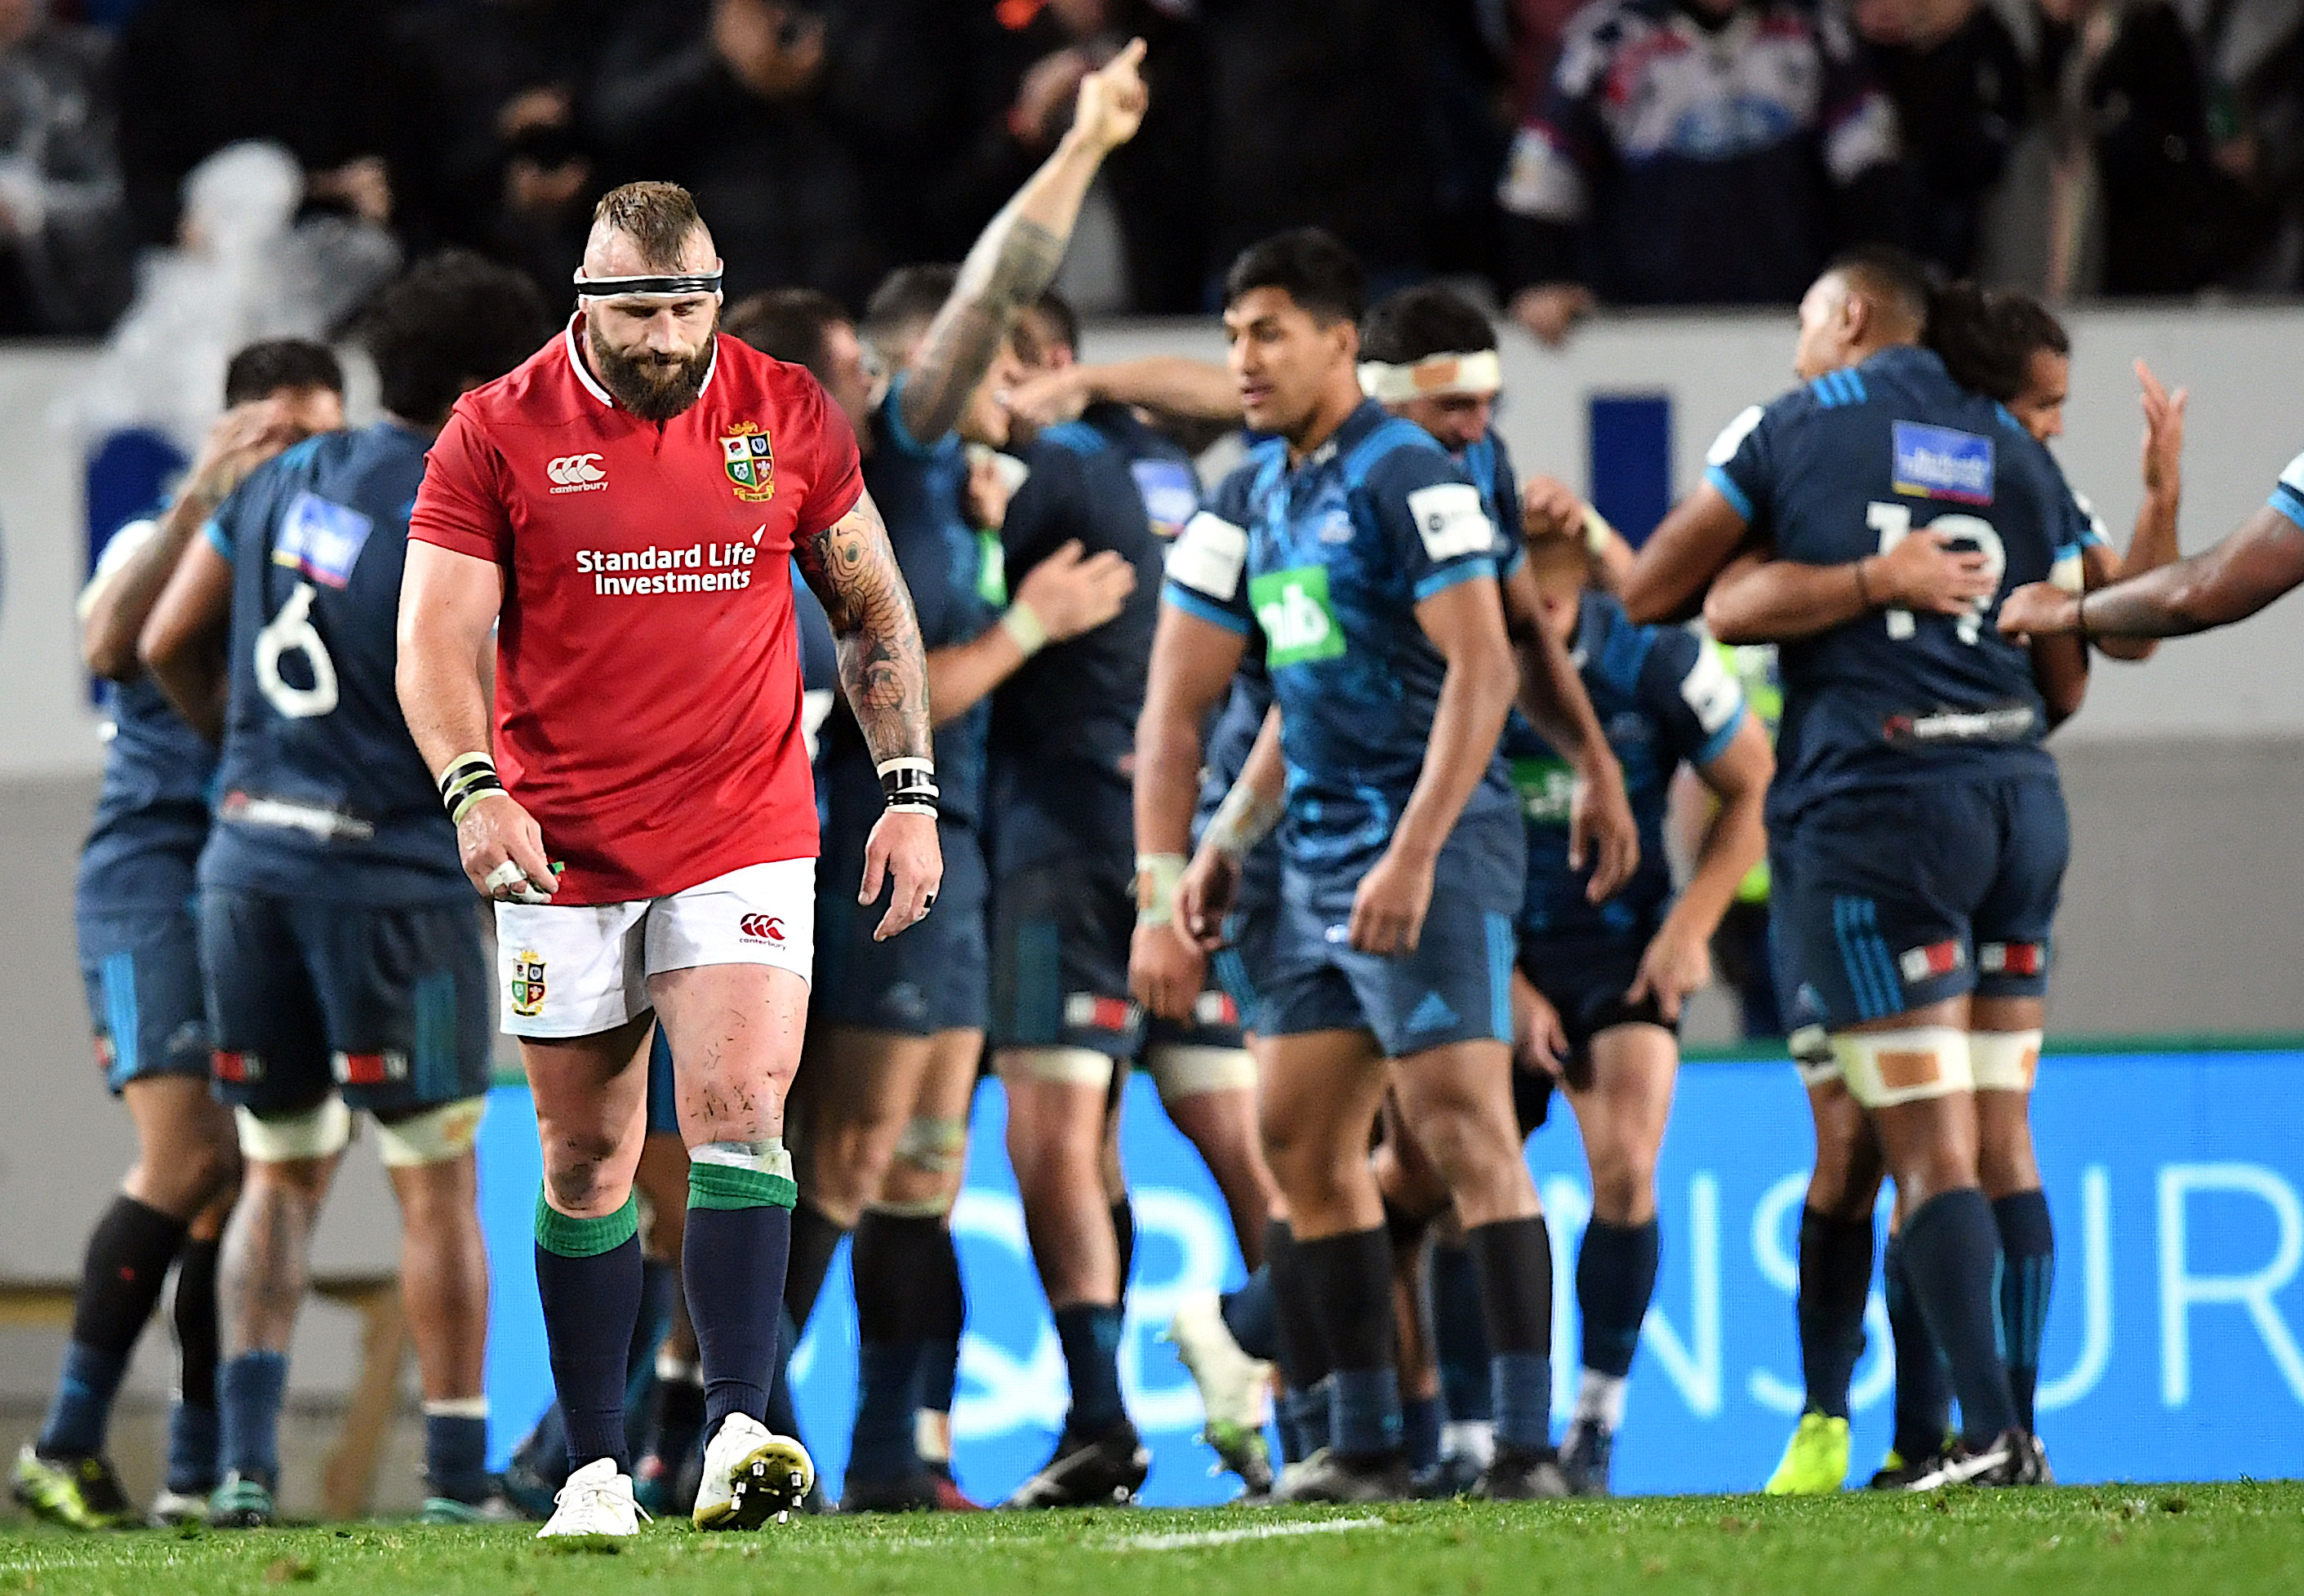 Rugby: Moment of magic gives Lions another lesson on New Zealand tour